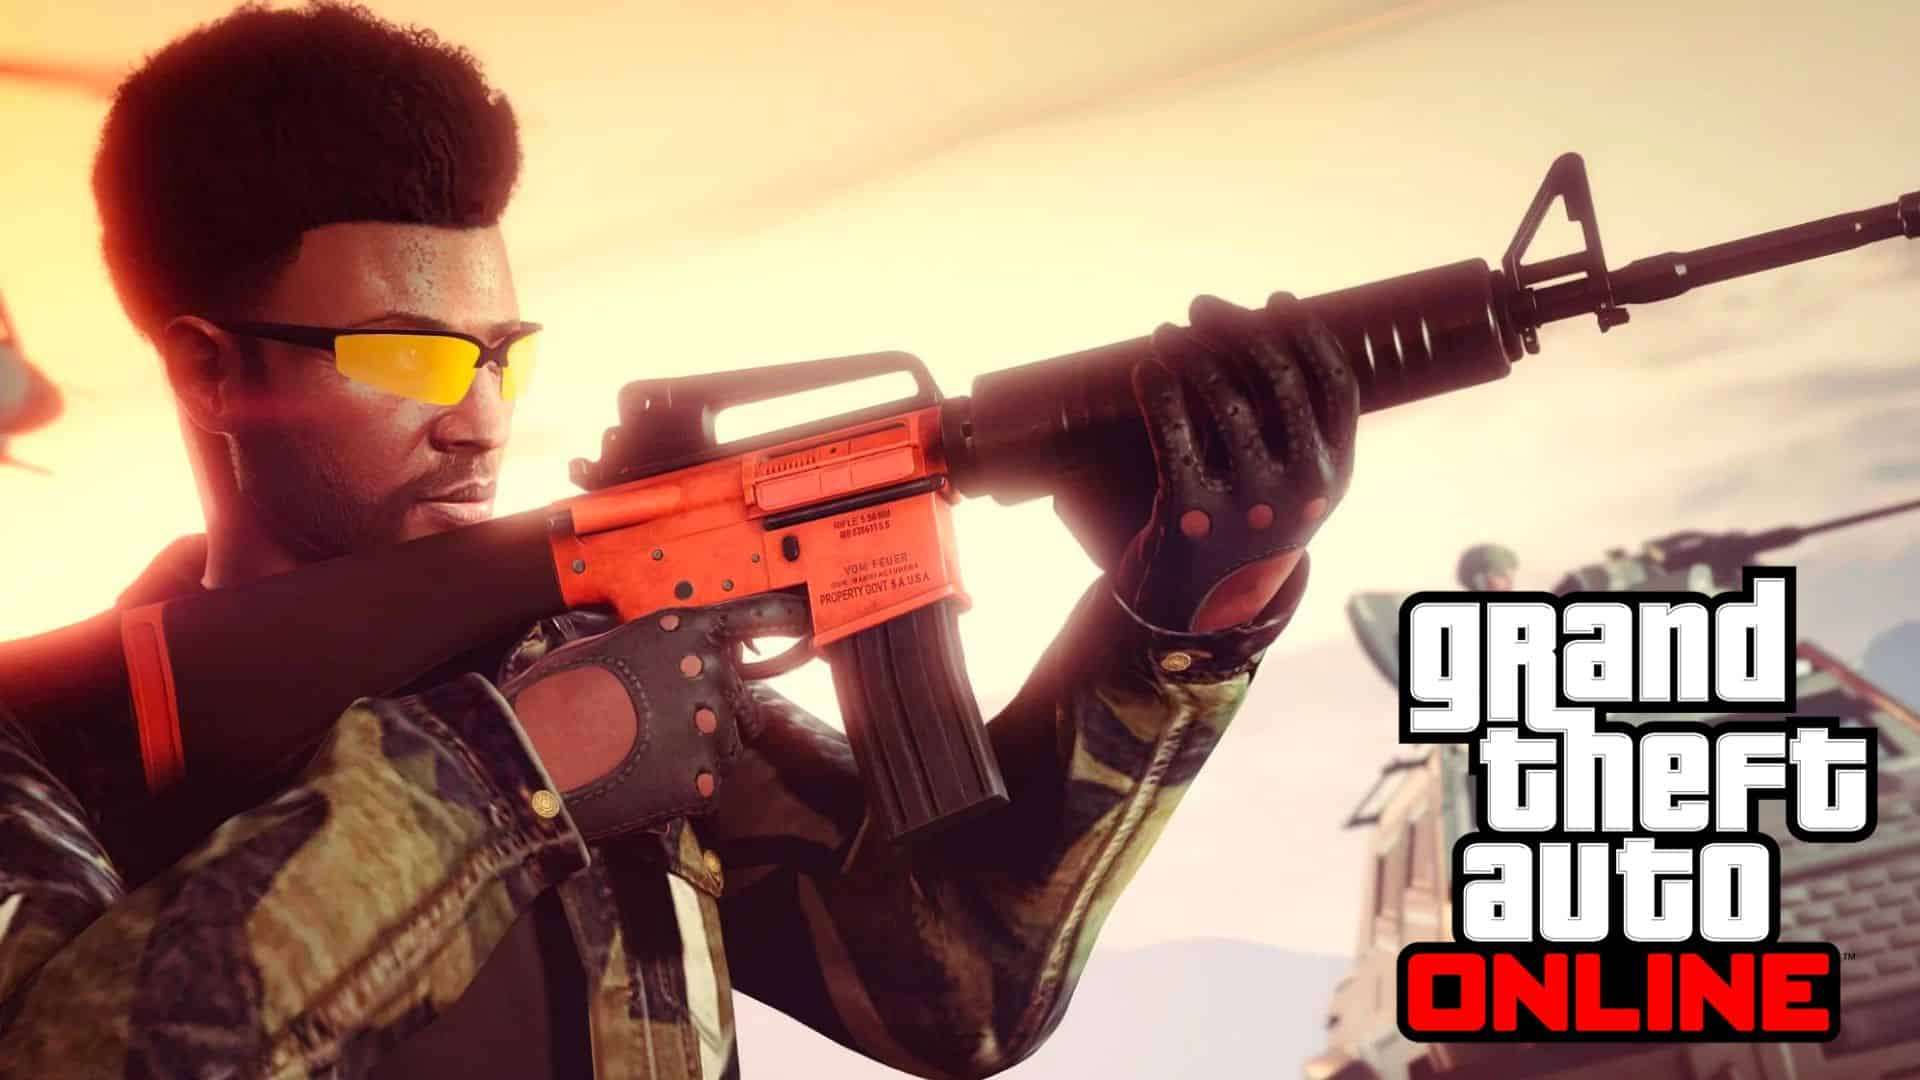 GTA online character aiming m16 to the sky against light background